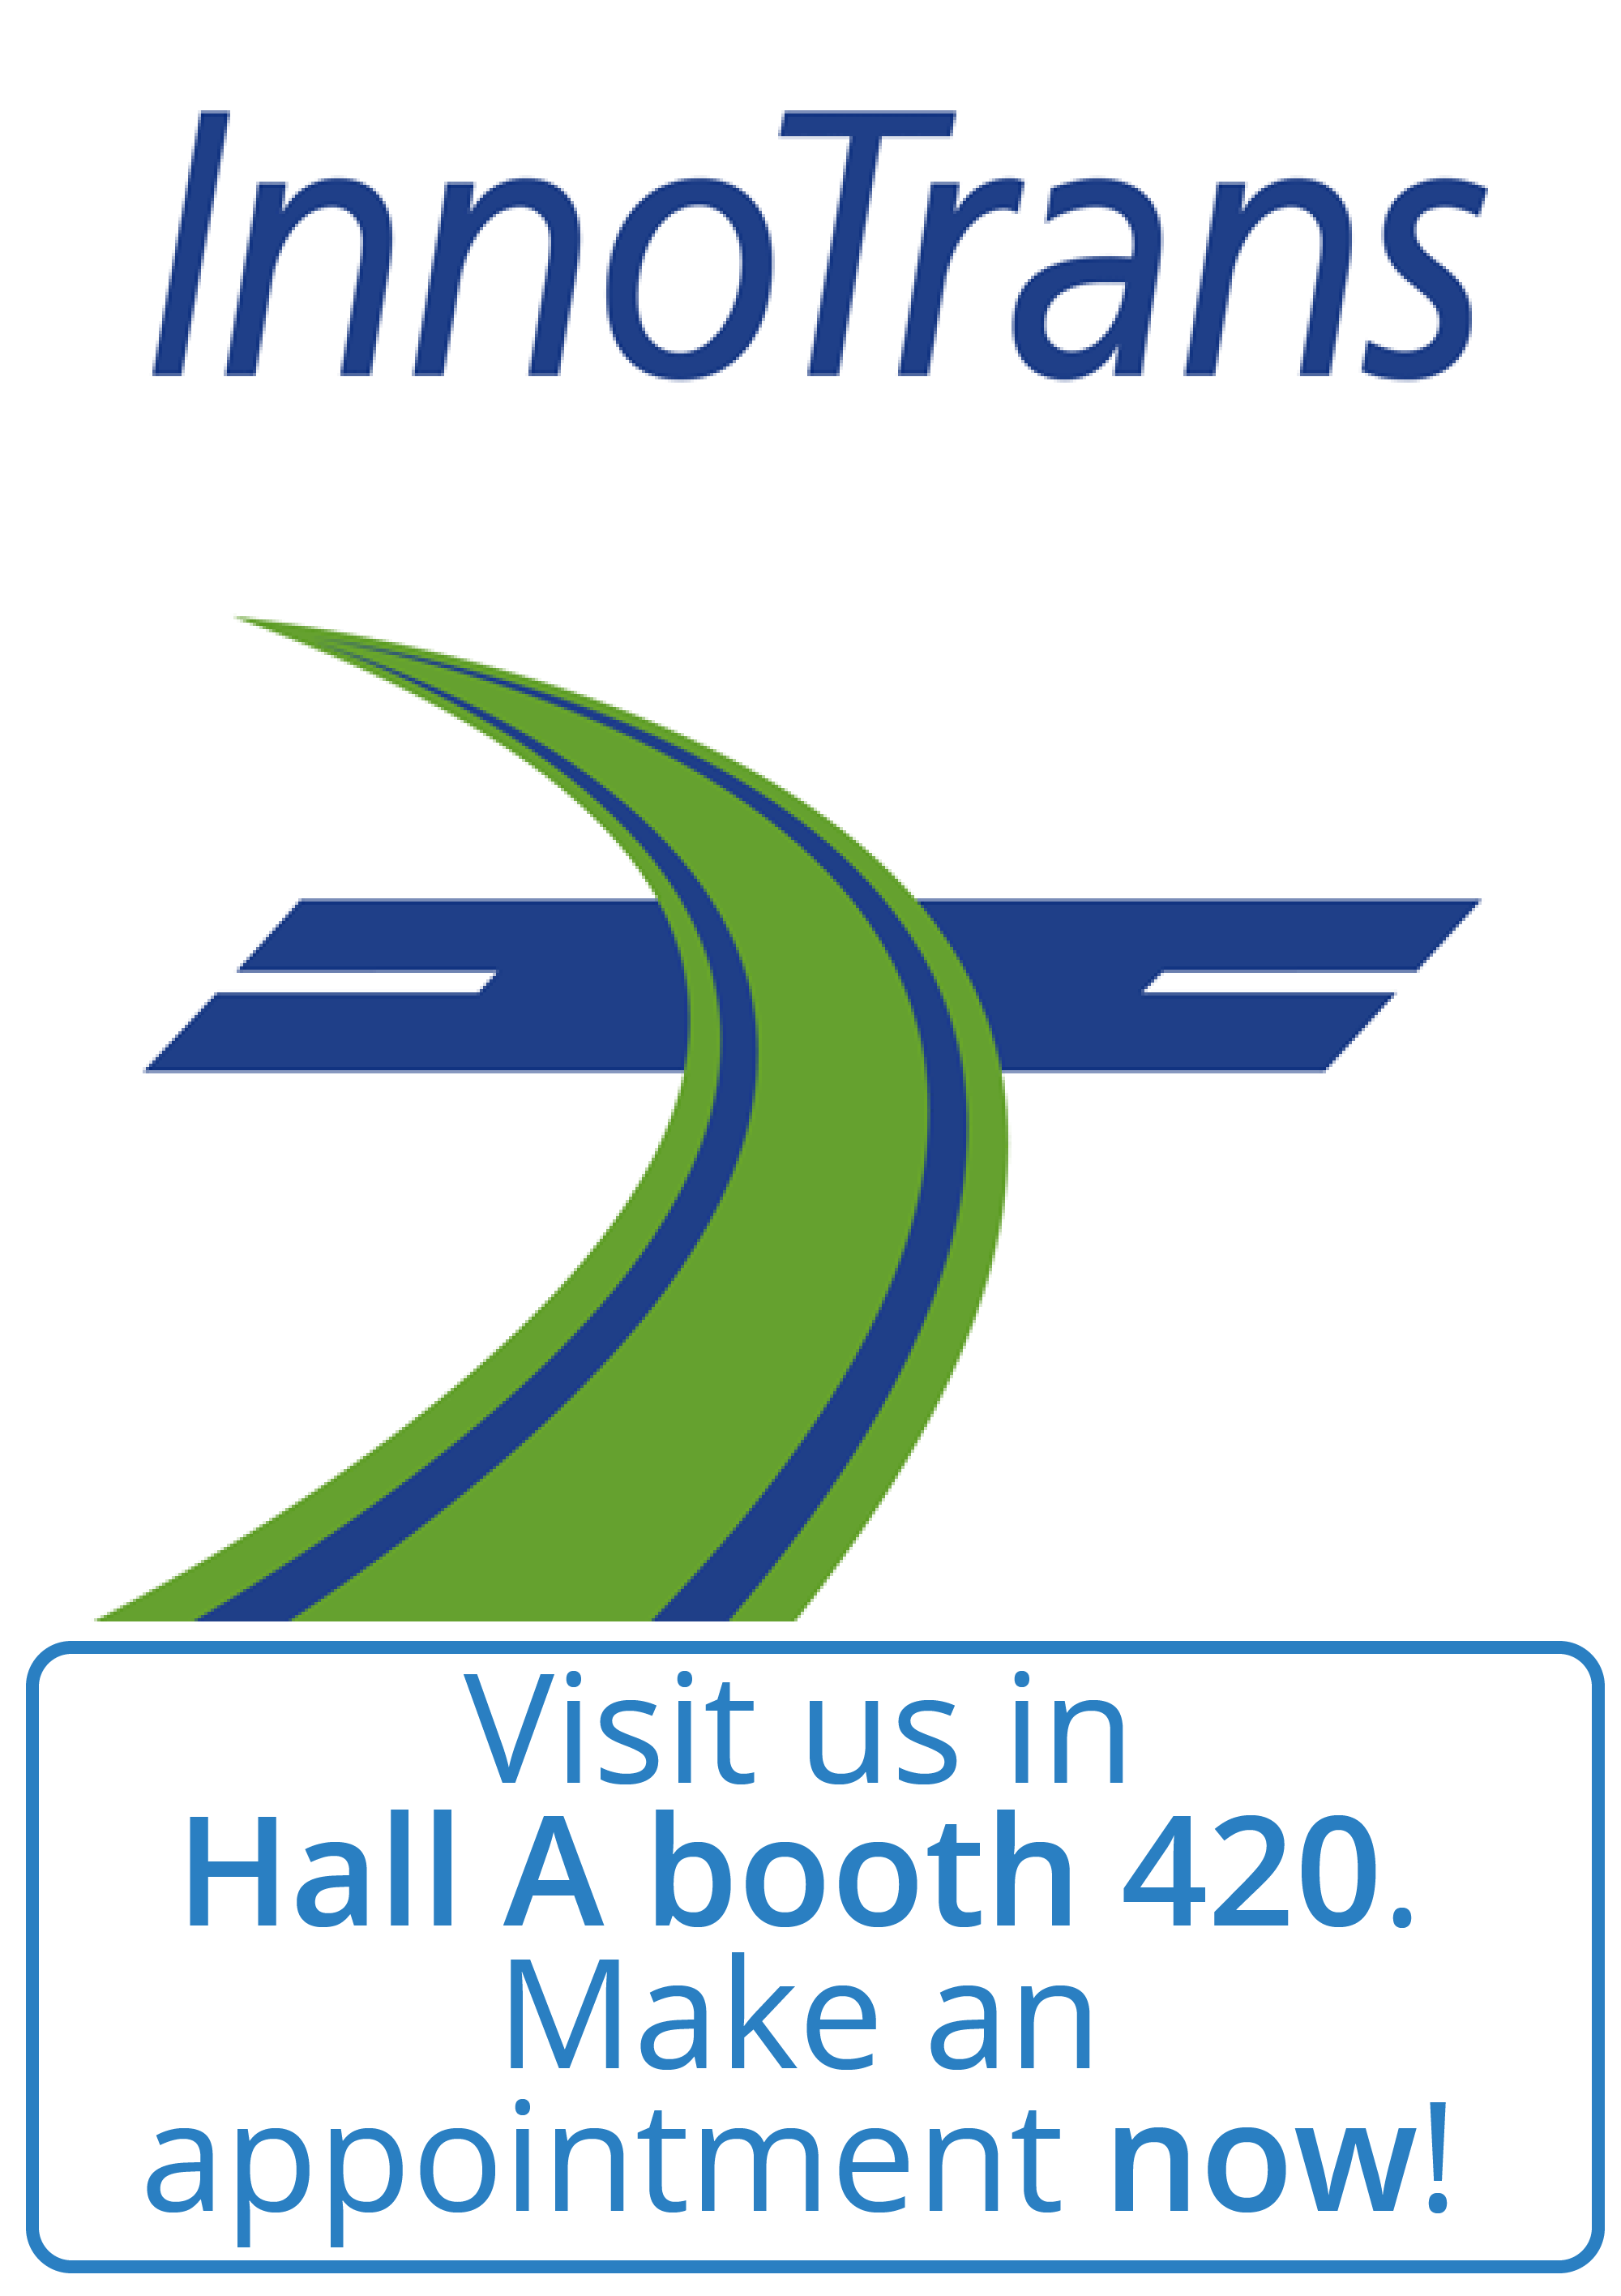 Visit us in Hall A booth 420. Make an appointment now!